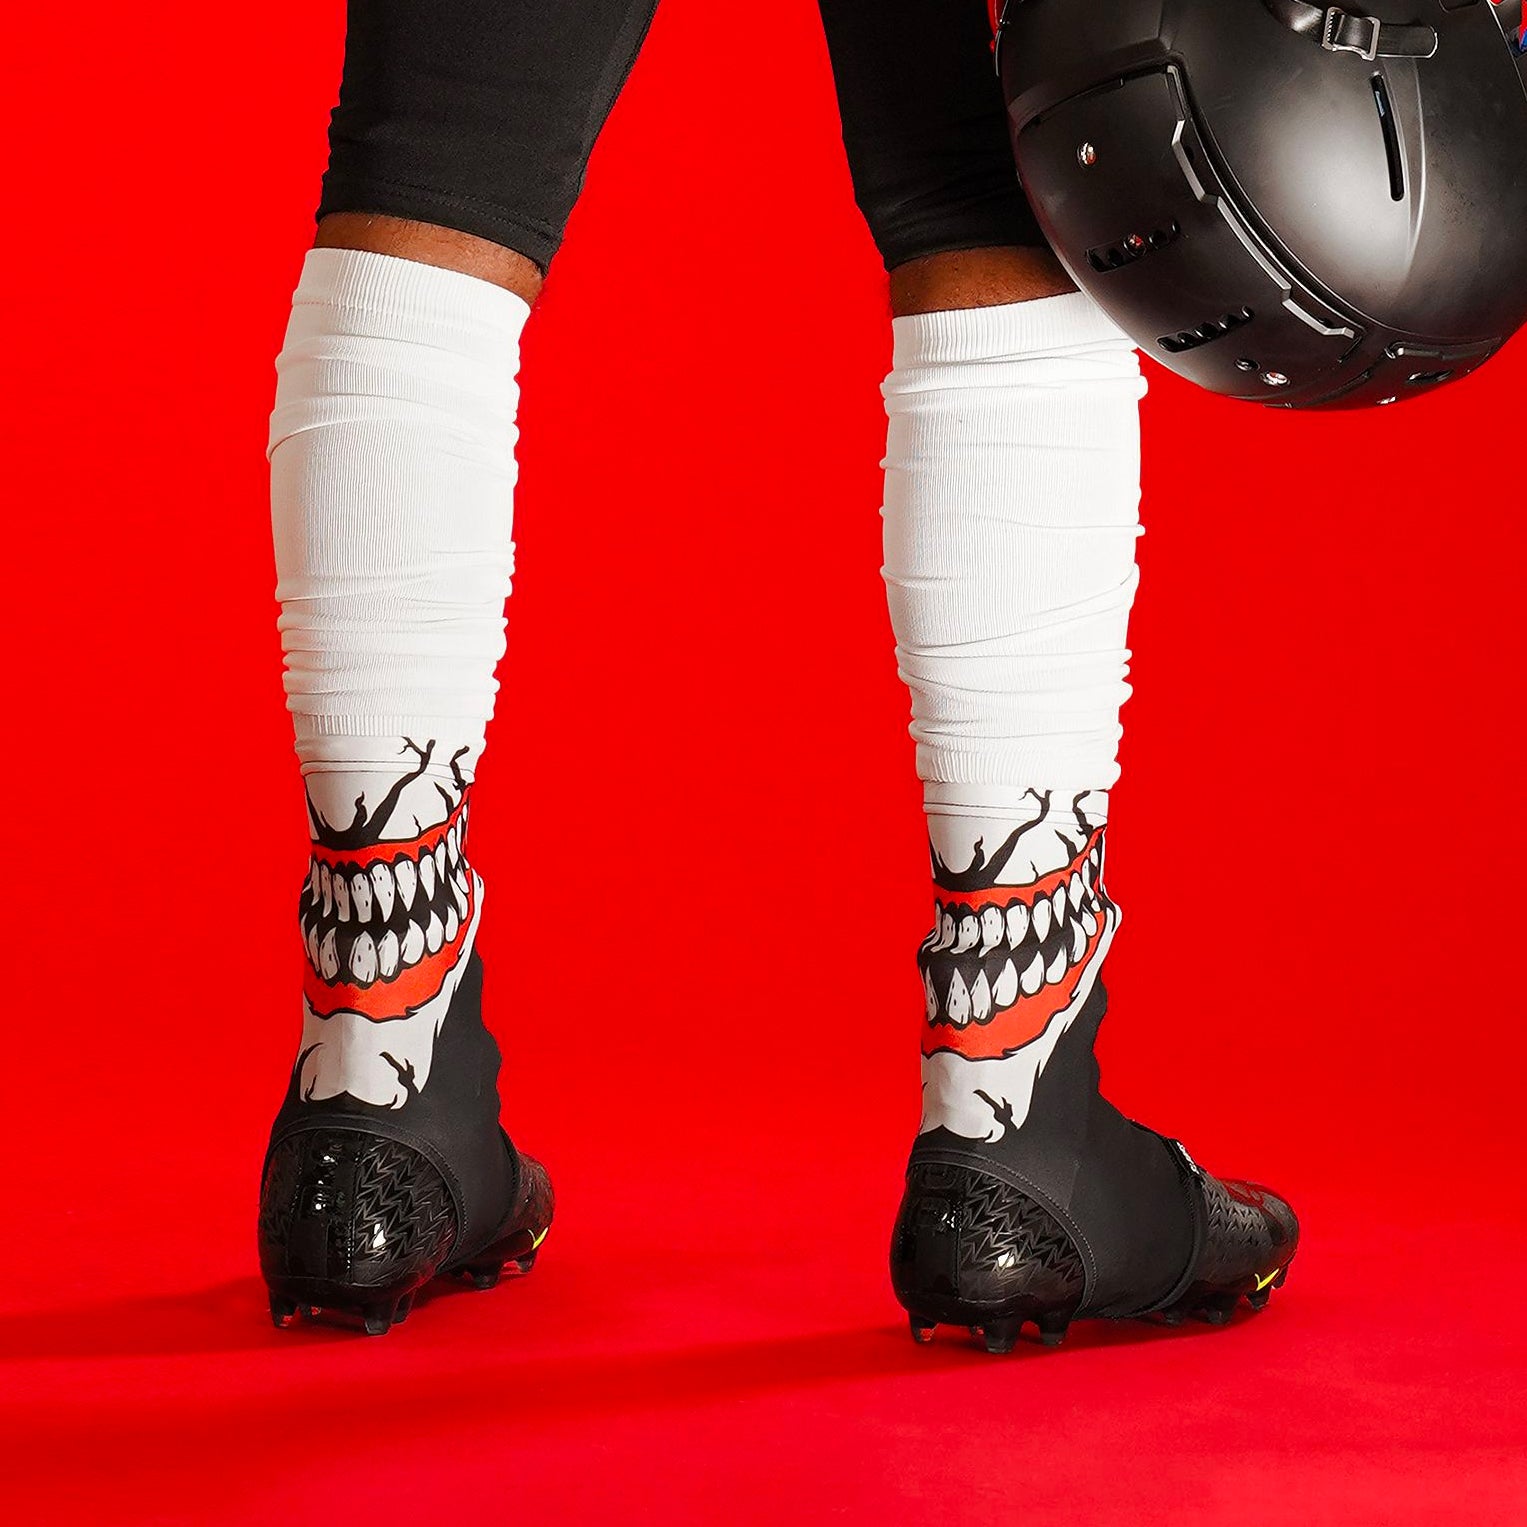 Hue Red Spats / Cleat Covers